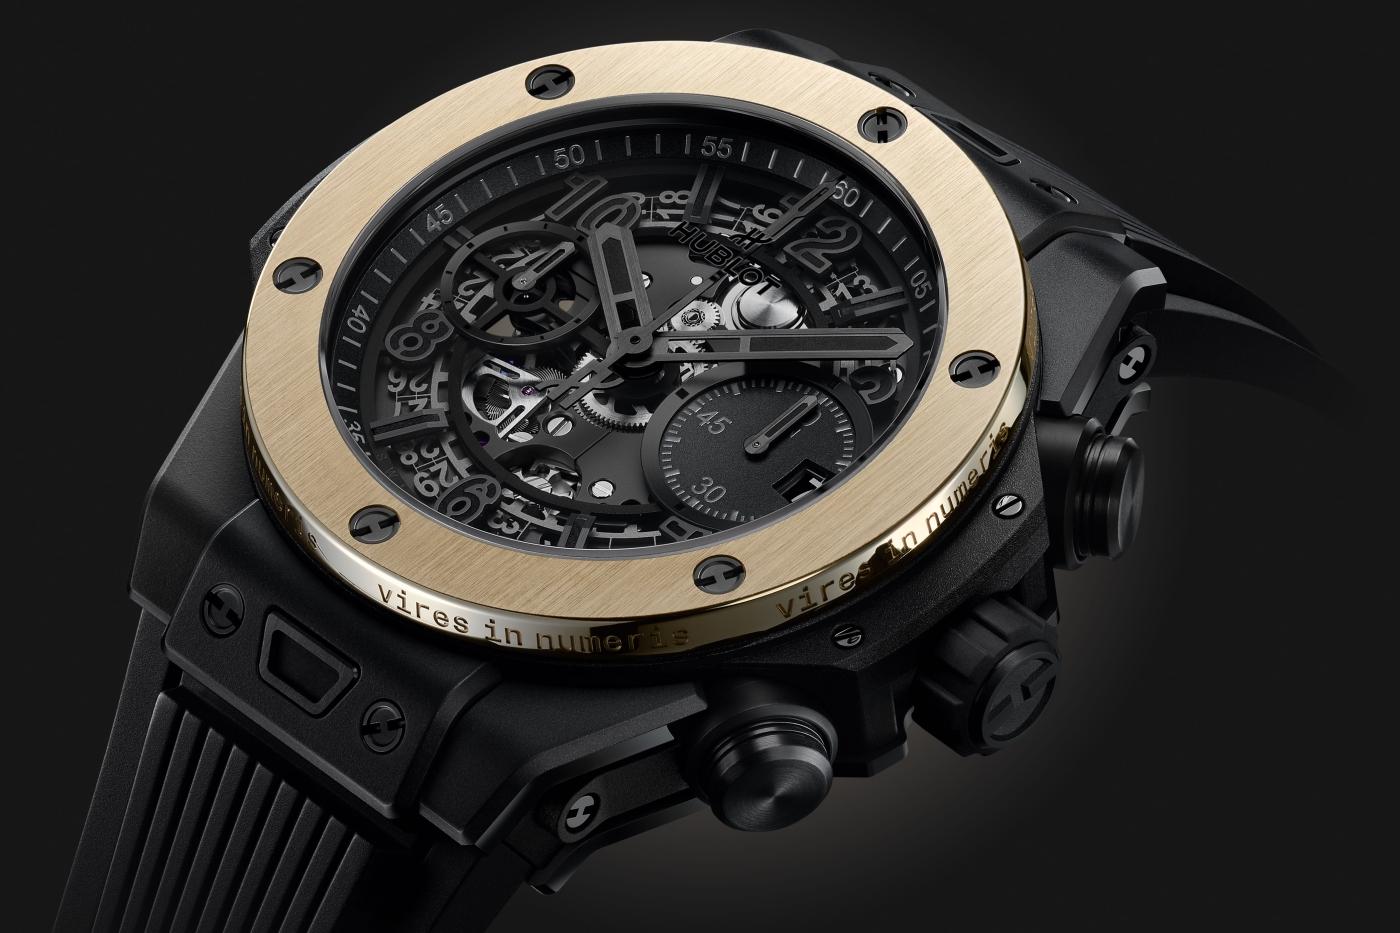 Hublot's Ridiculously Priced Bitcoin Watch Is Perfectly Designed To Help Me Spot Terrible Jabronis